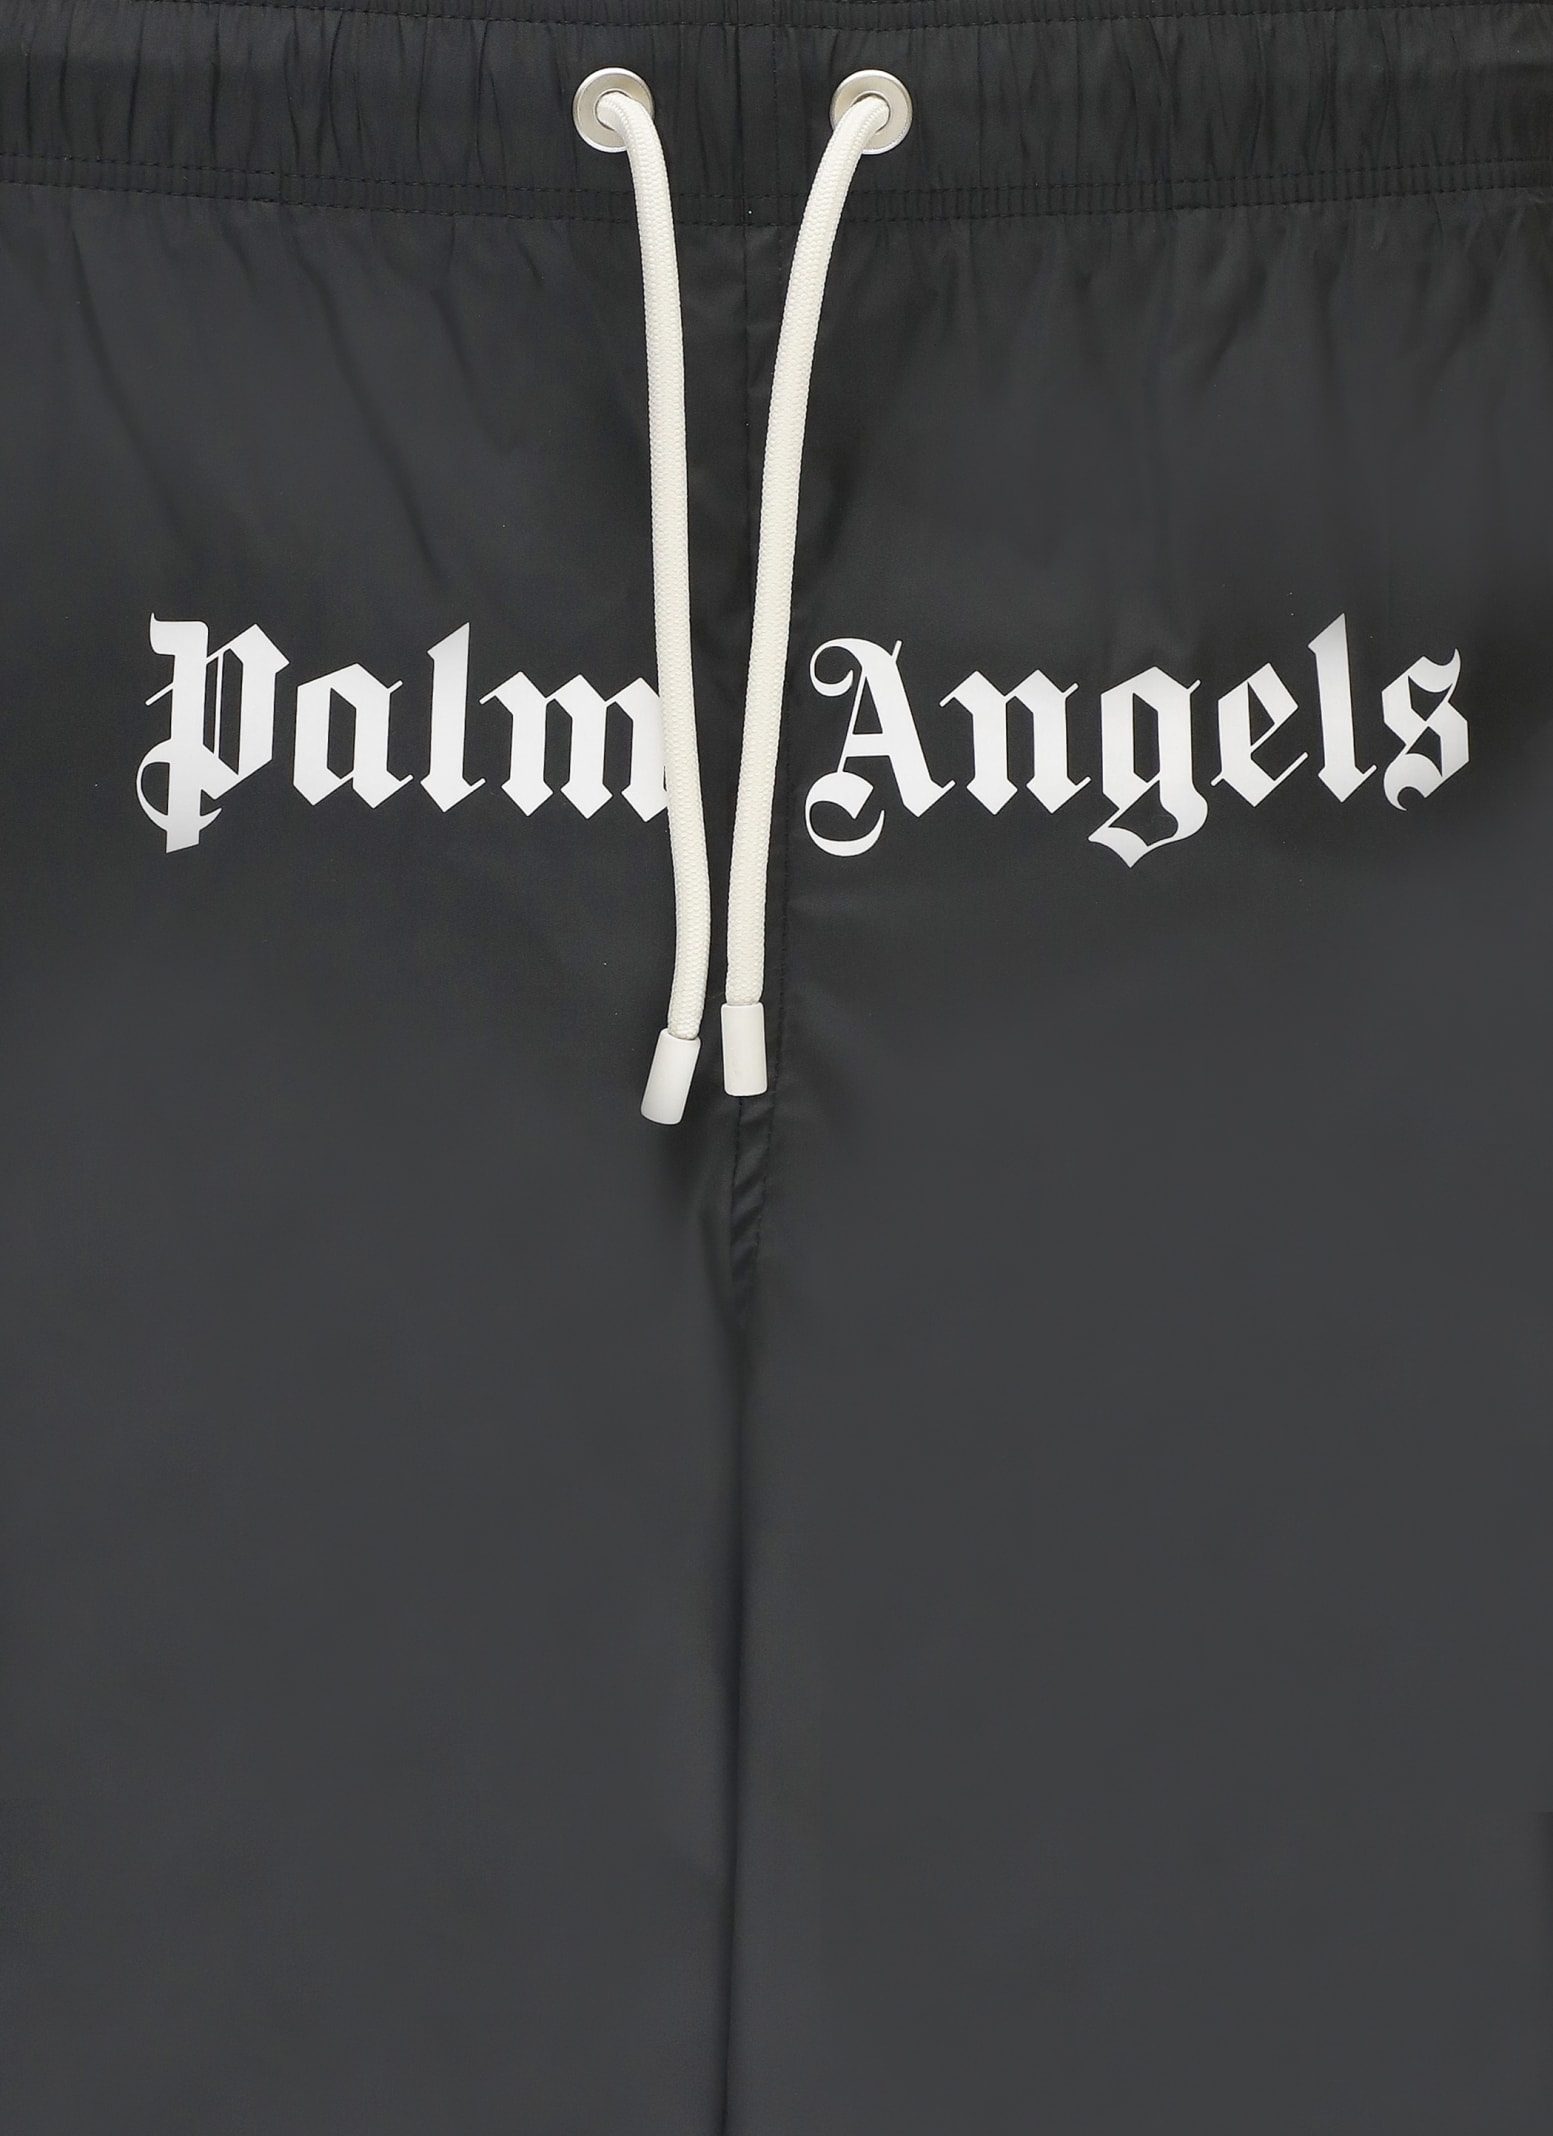 Shop Palm Angels Swim Trunks With Logo In Black